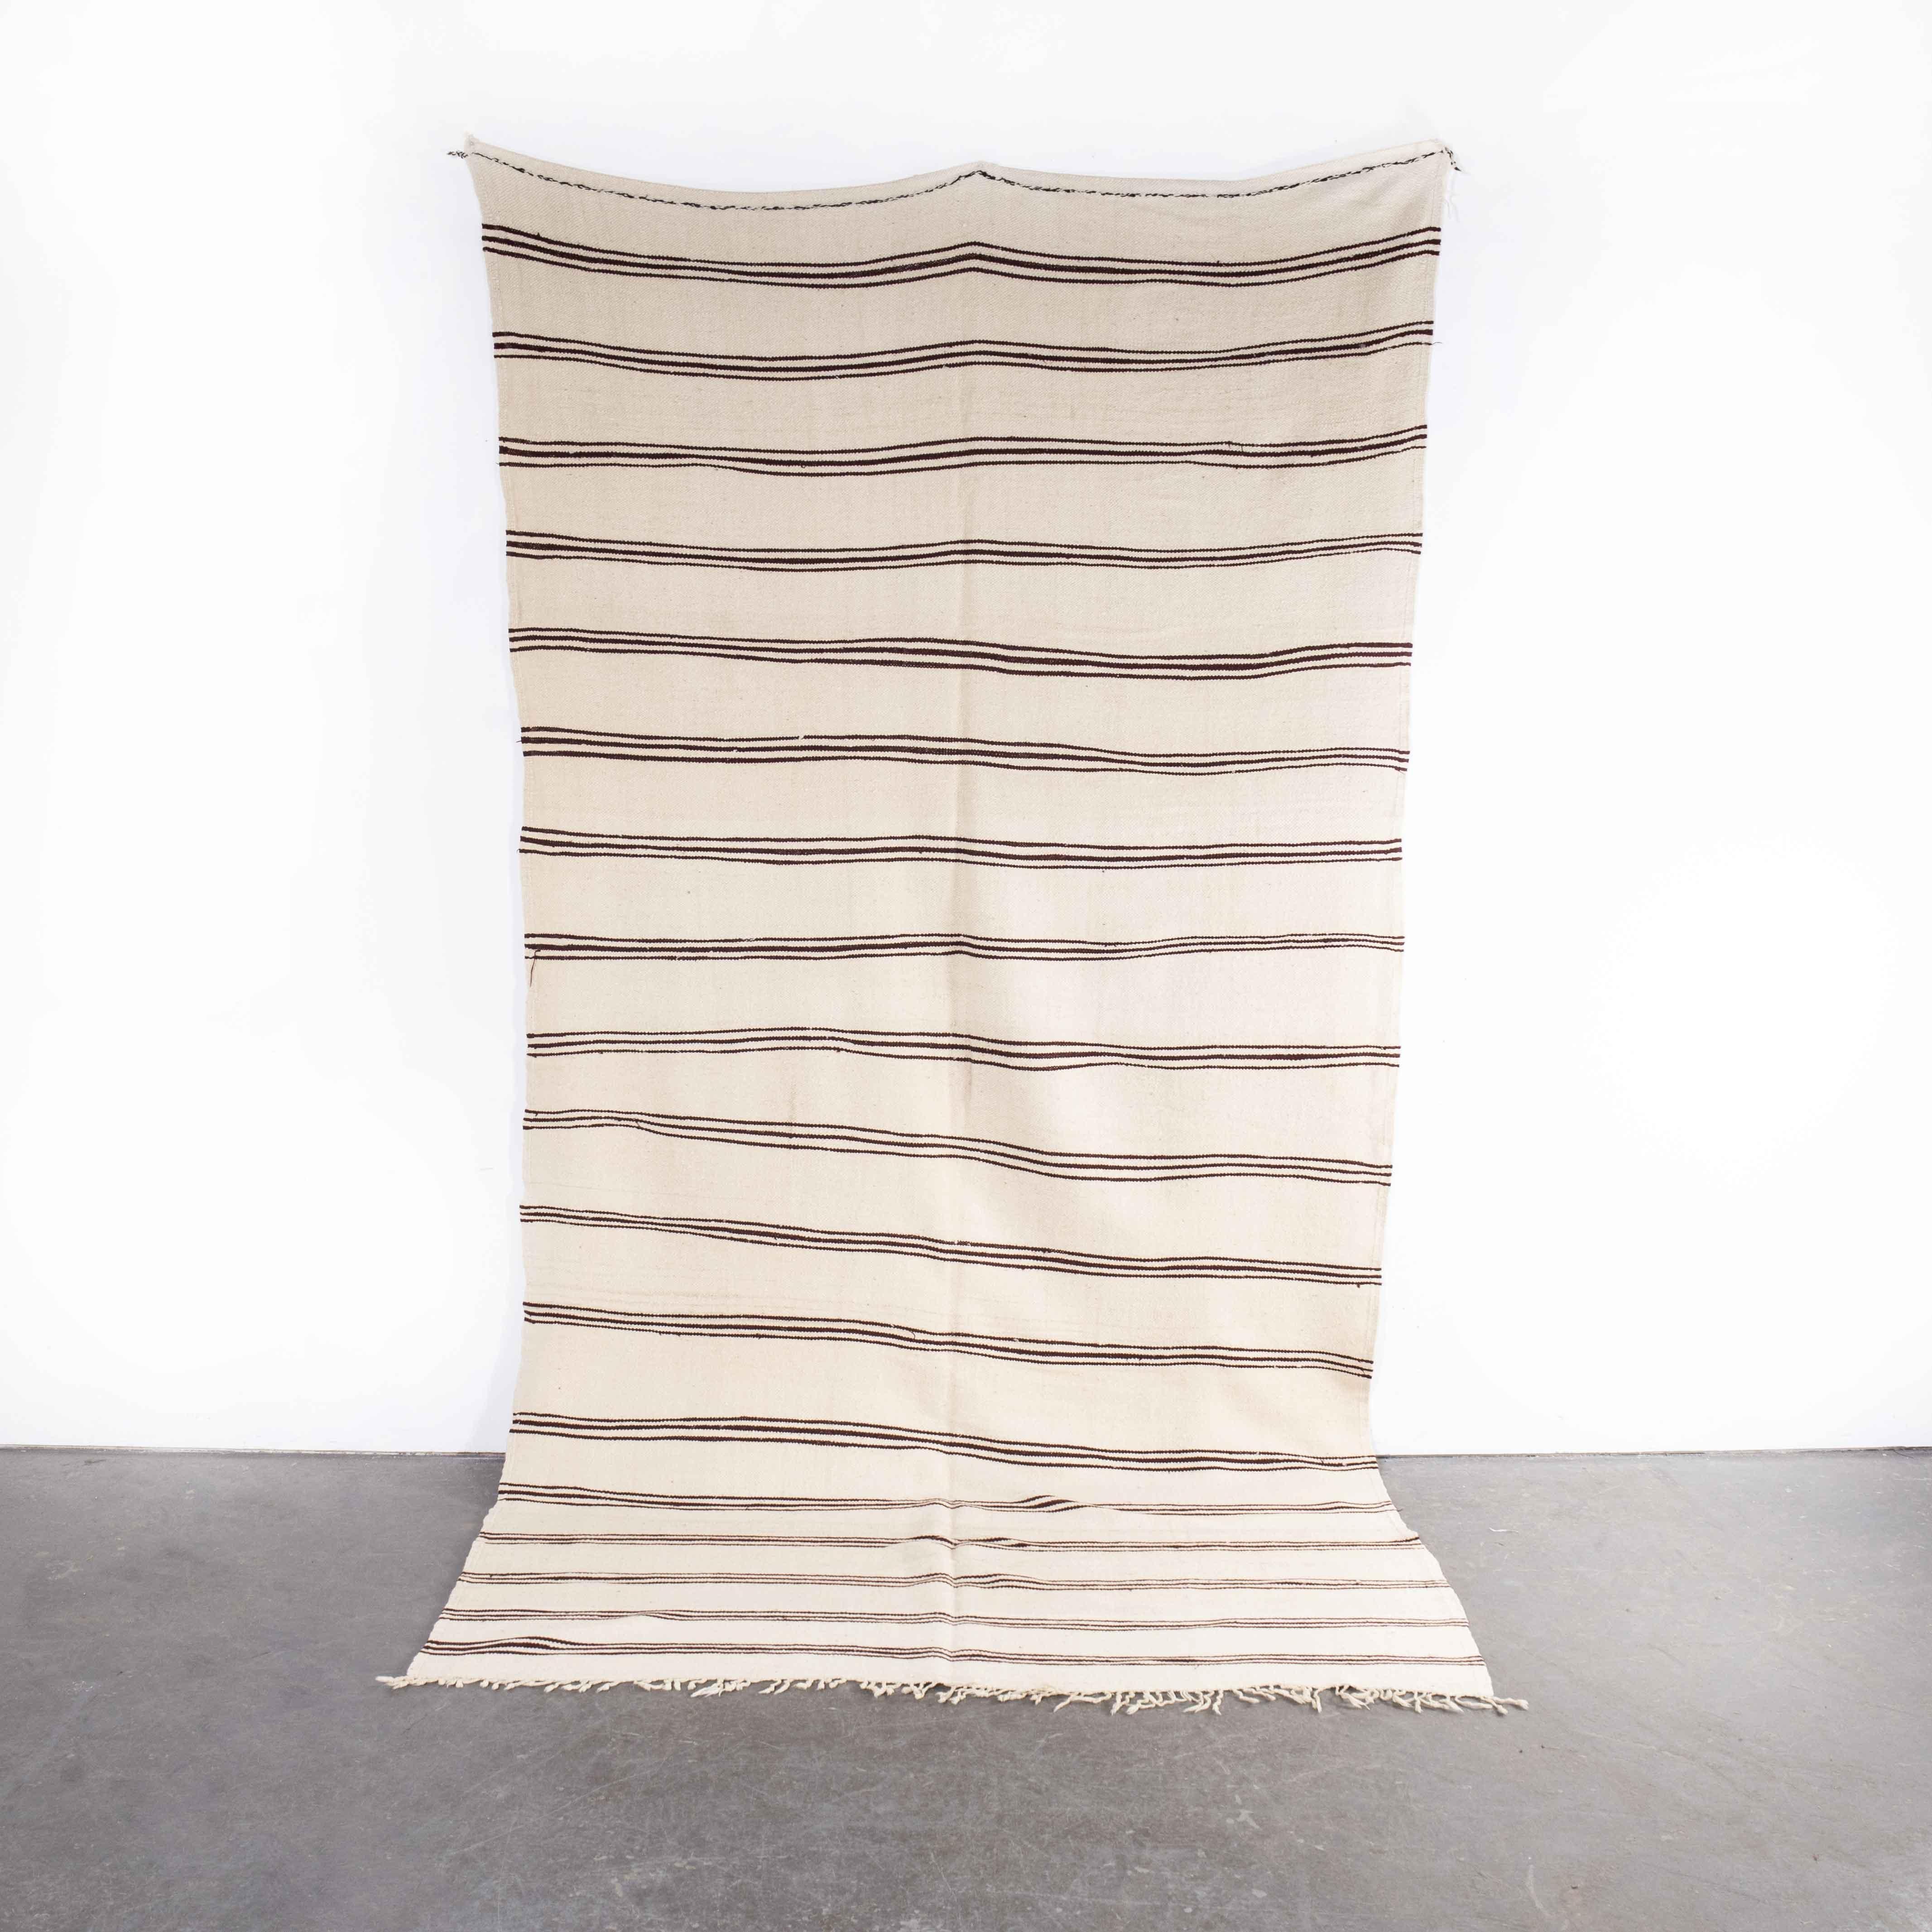 Vintage Berber bold monochrome thin stripe hanbel rug
Vintage Berber bold monochrome thin stripe hanbel rug. These are flat-woven rugs (Hanbel in Arabic) which are light in weight due to the lack of pile. They are often used on floors in hotter